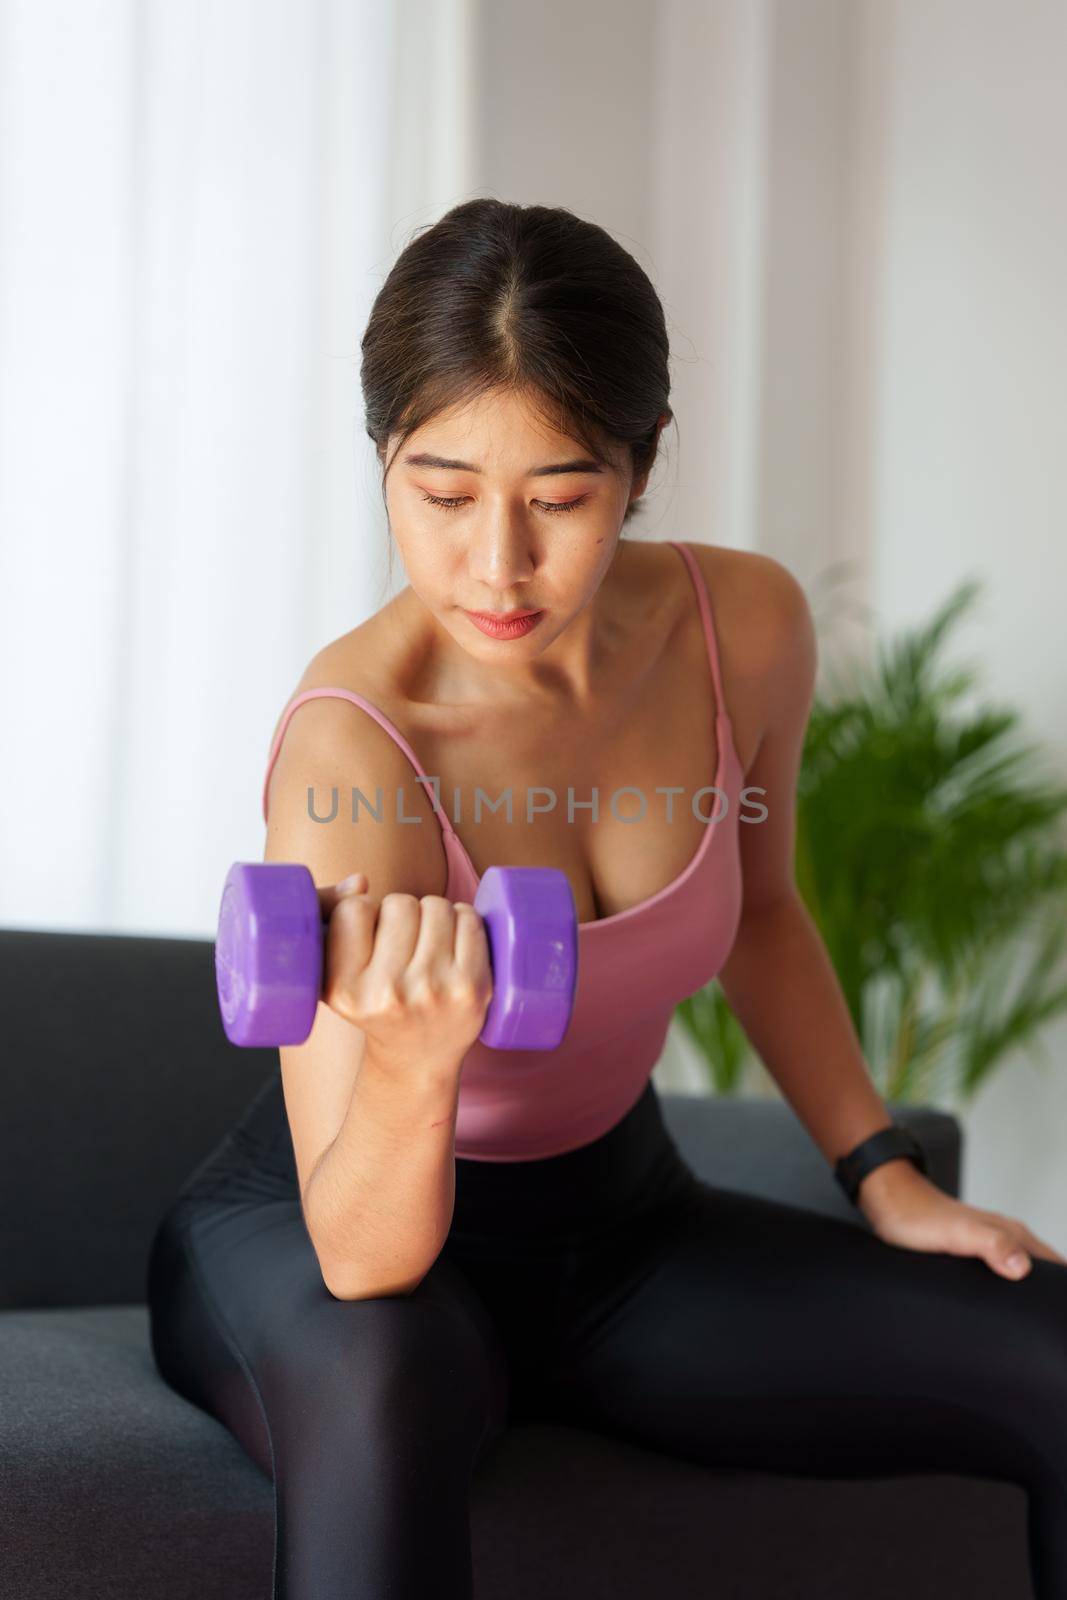 Beautiful woman exercising with dumbbells at home. bodybuilding, fitness, sport, weightlifting concept